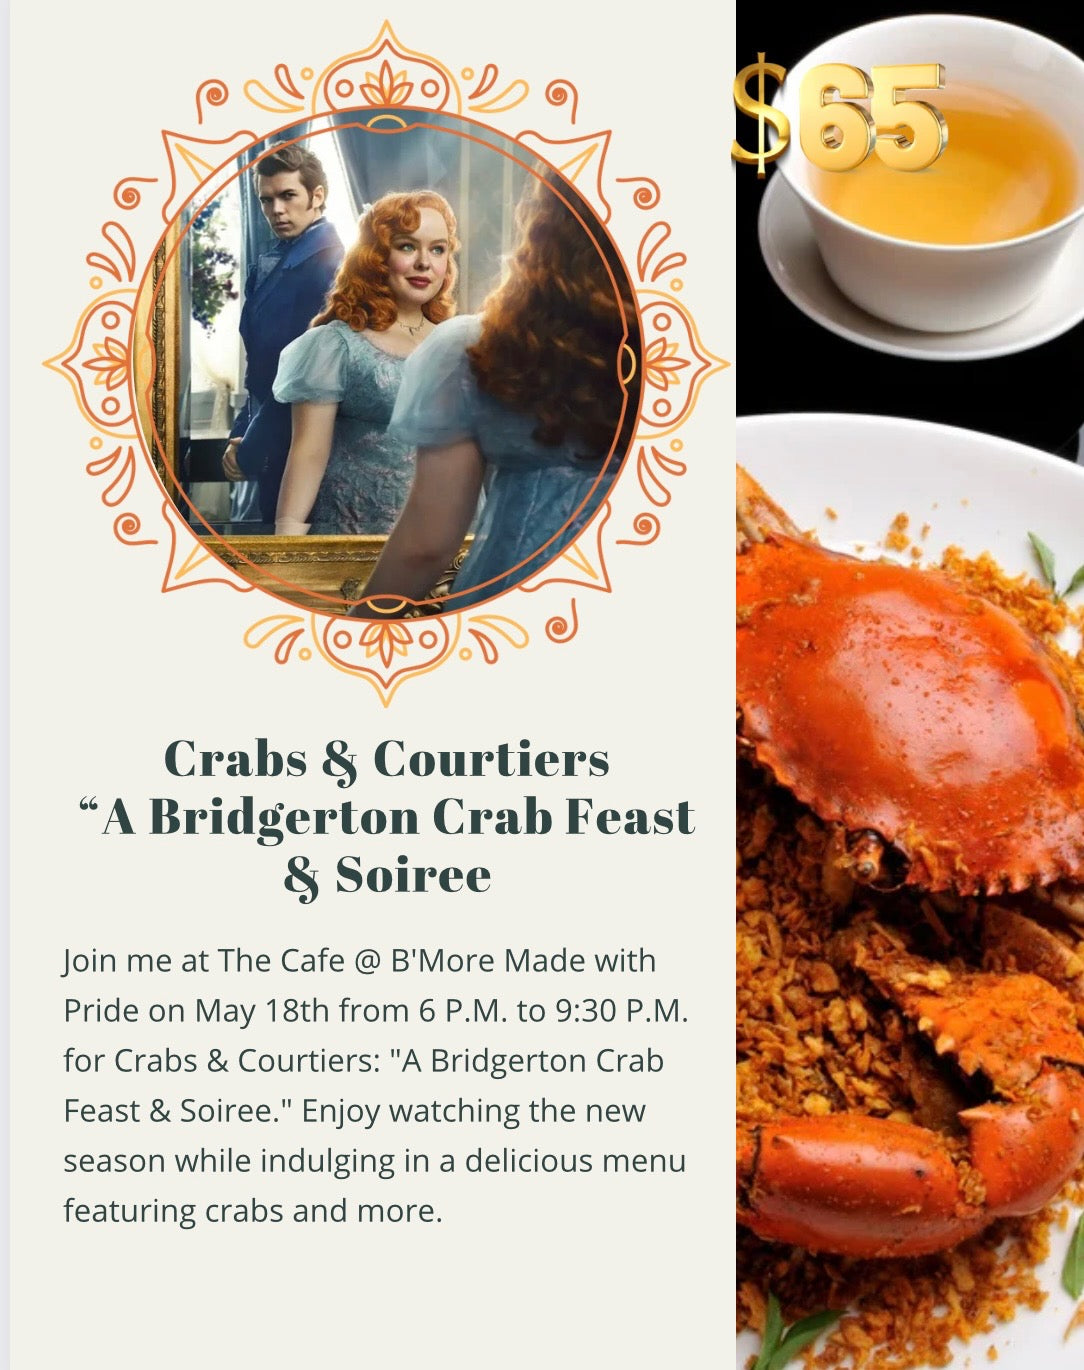 Crab and Courtiers: "A Bridgerton Crab Feast and Soiree"